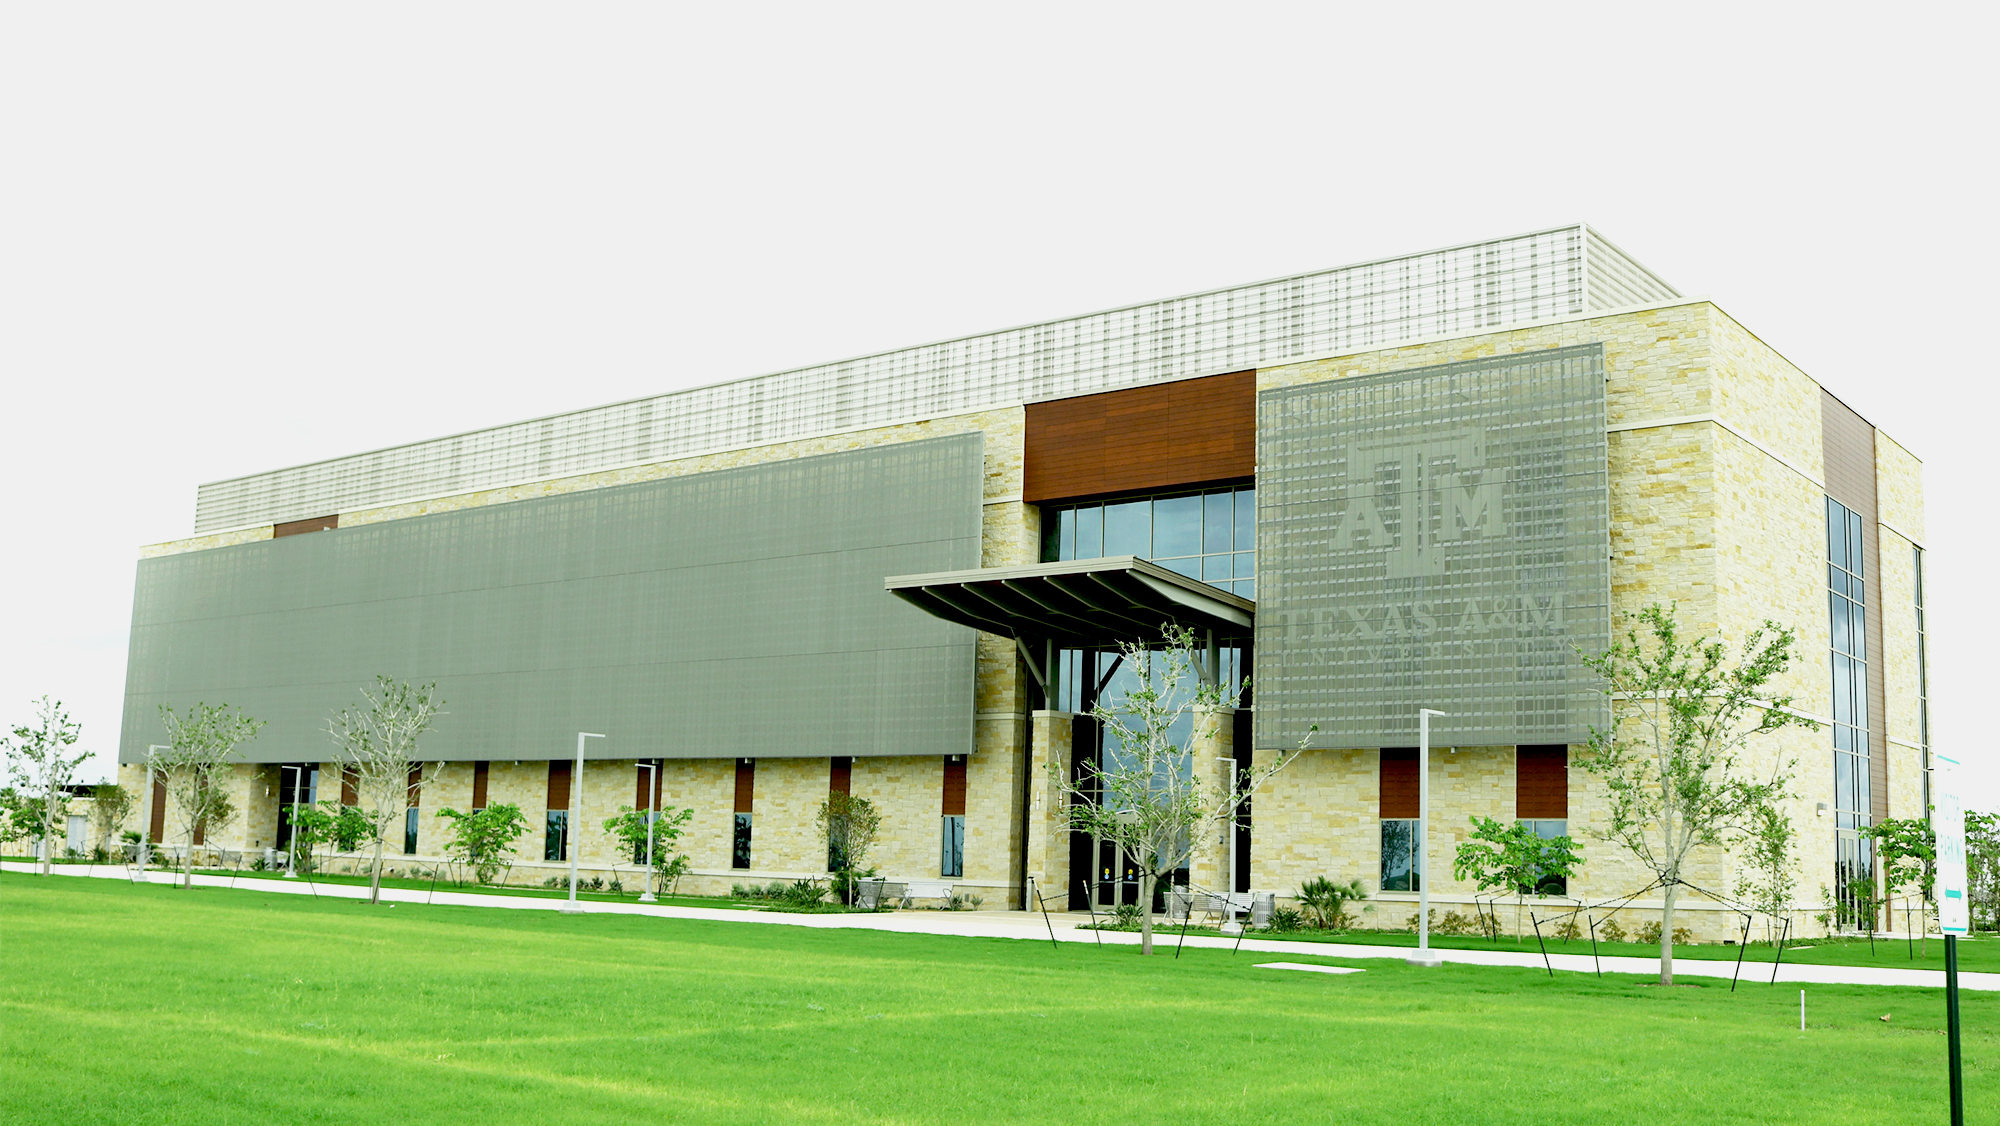 The exterior of the Higher Education Center at McAllen is shown.